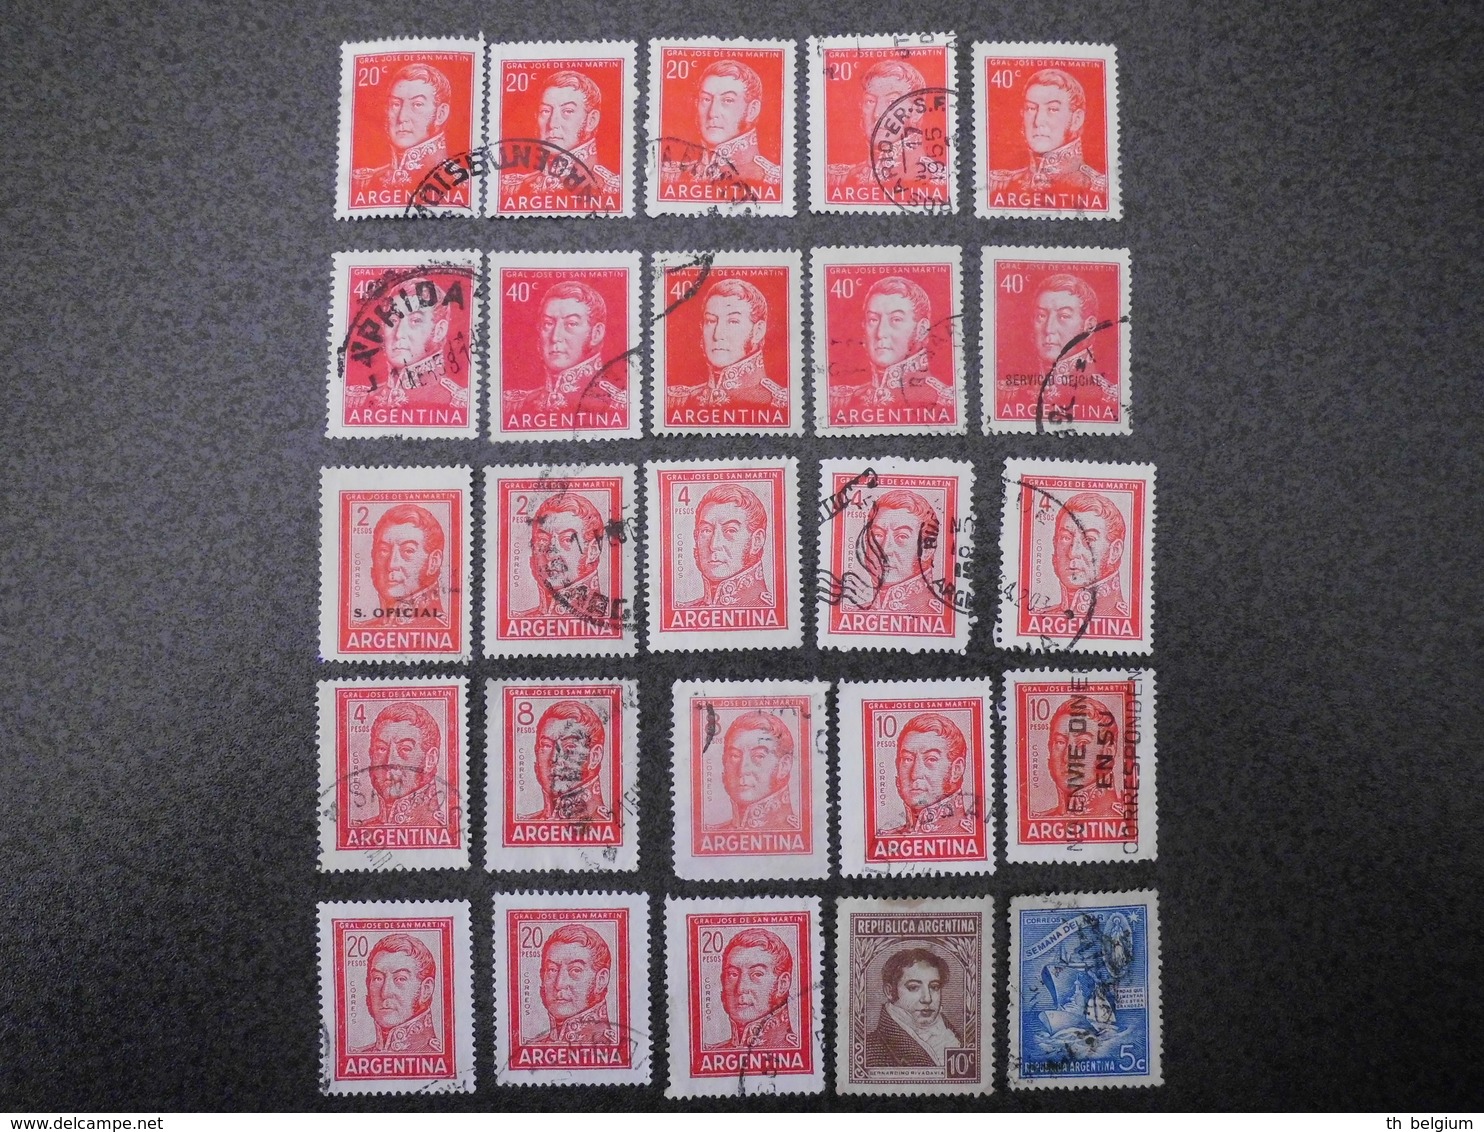 Stamps of the world: Argentina - +- 293 stamps